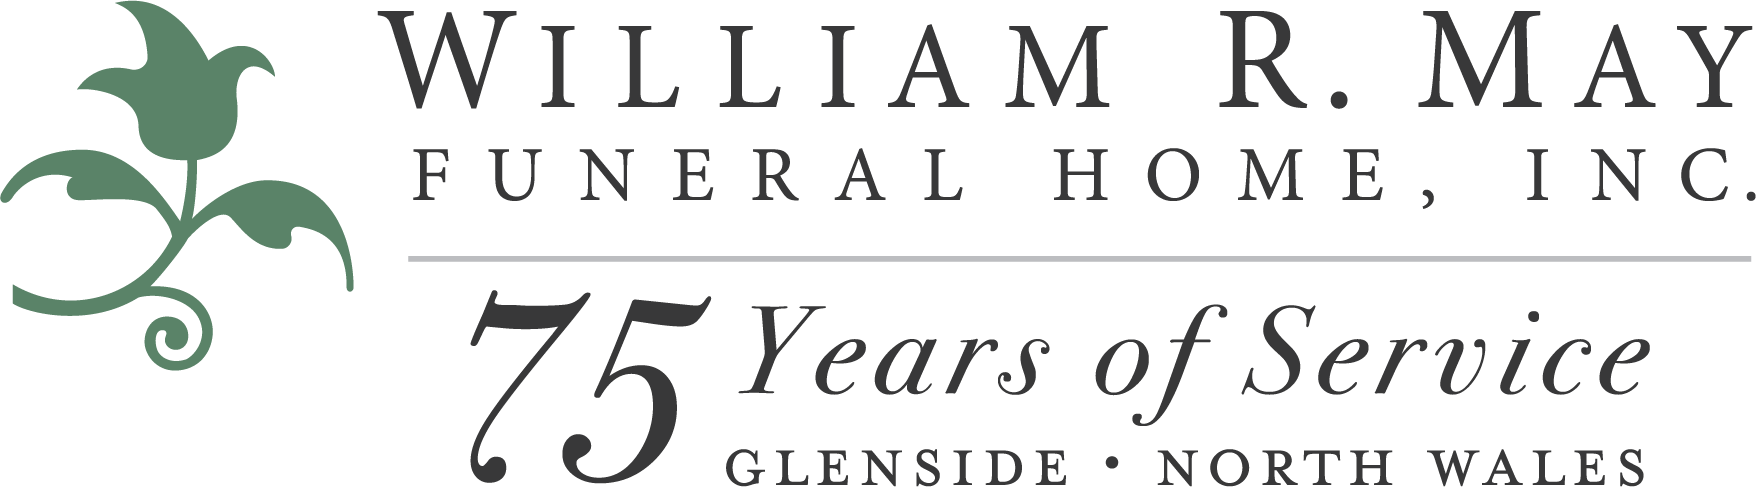 William R. May Funeral Home, Inc. Logo